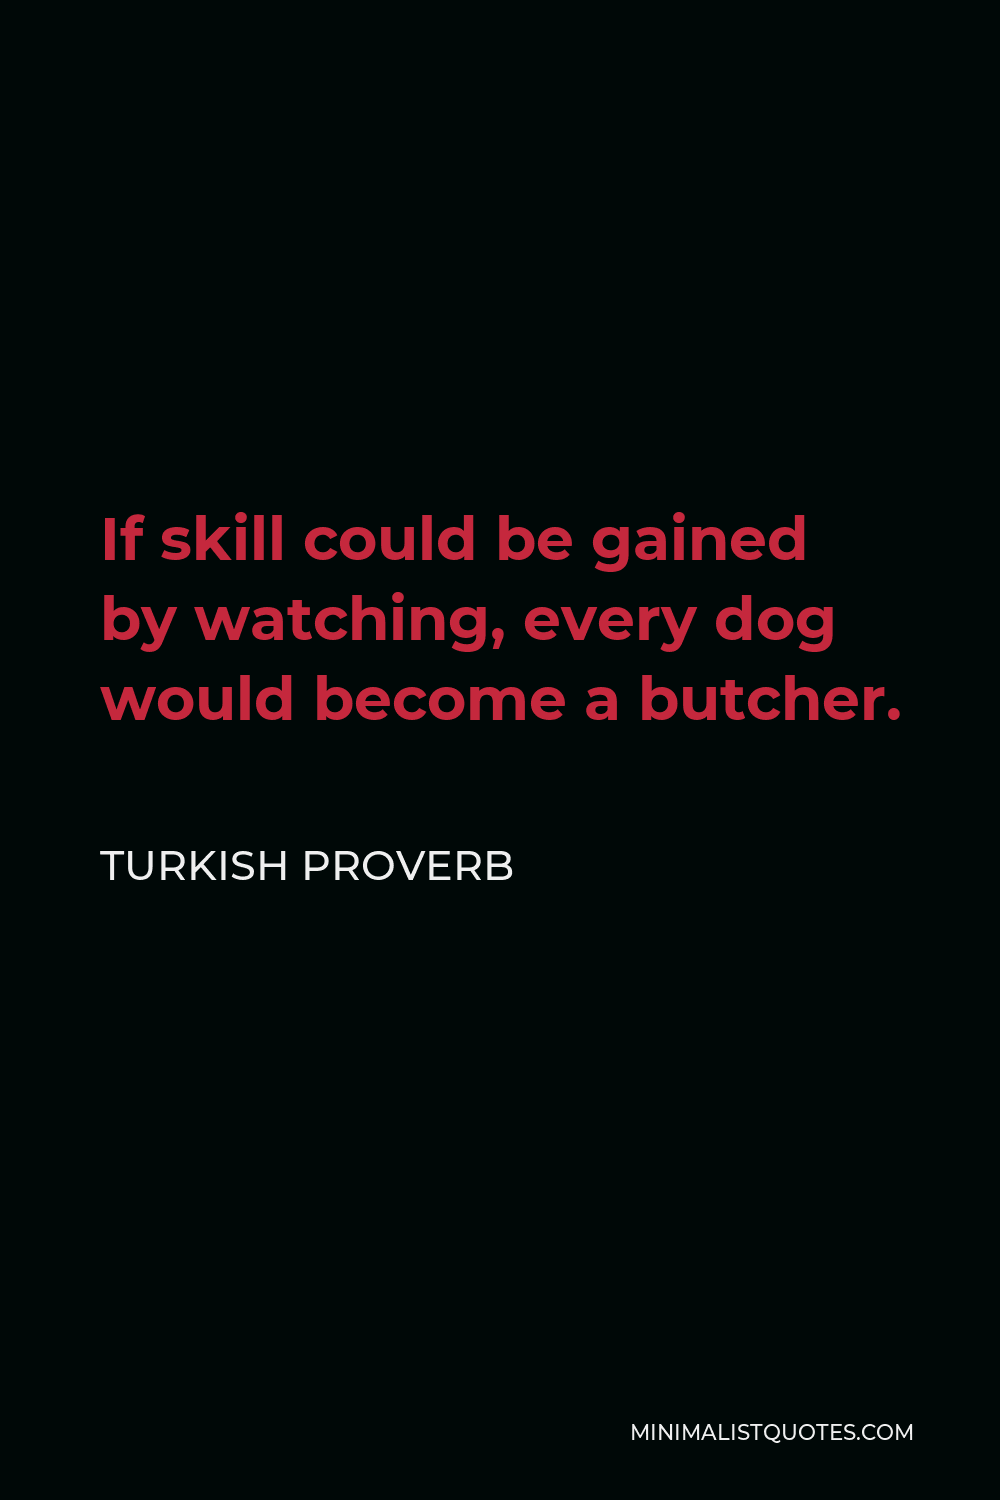 Turkish Proverb Quote - If skill could be gained by watching, every dog would become a butcher.